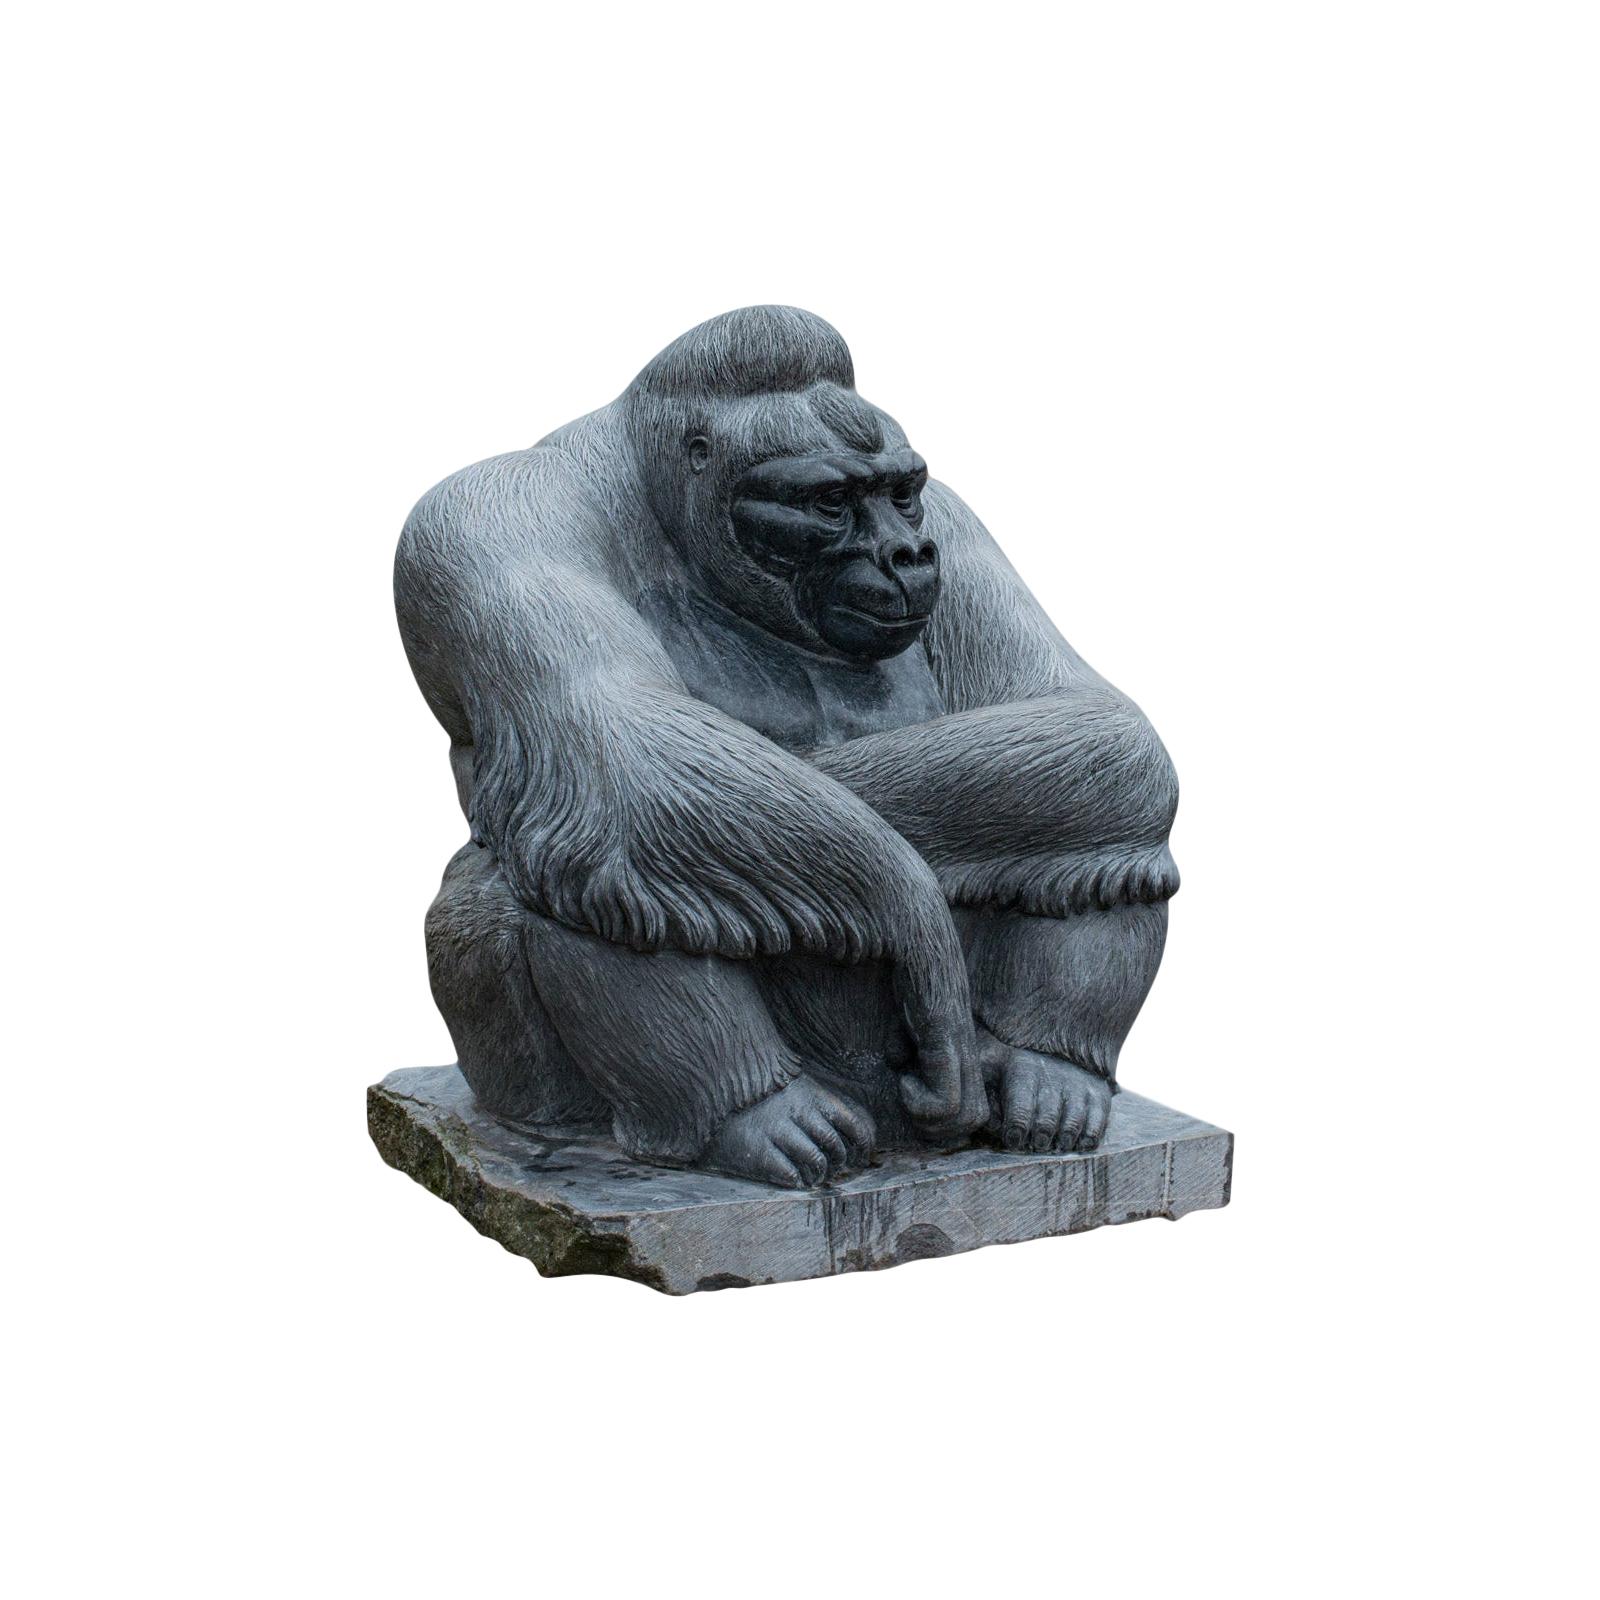 Large Sculptural Artwork Marble Statue Shabani Lowland Gorilla by Dominic Hurley